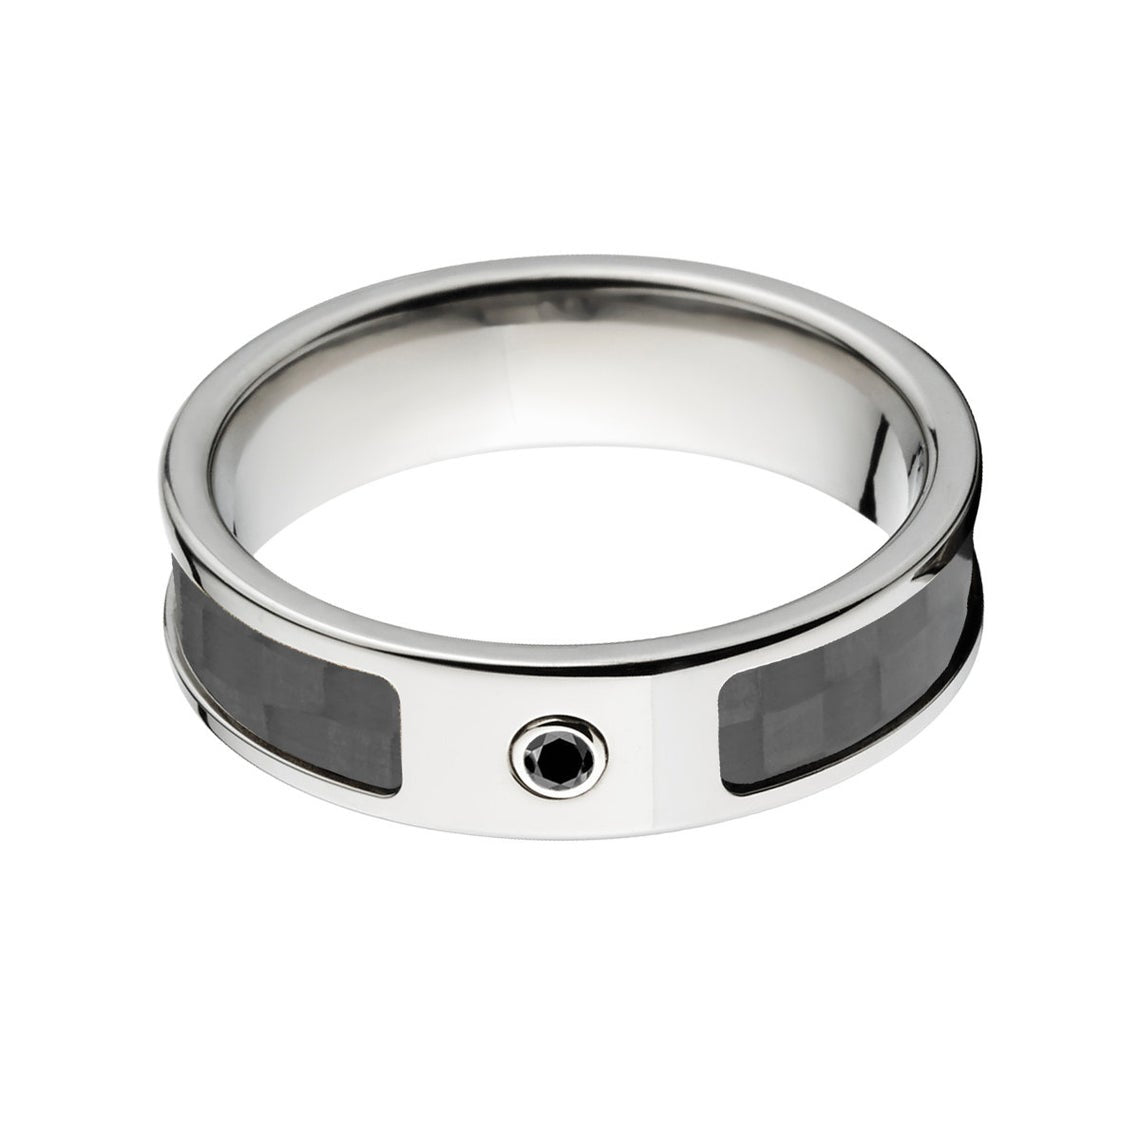 6mm wide titanium ring with a black carbon fiber with a black diamond